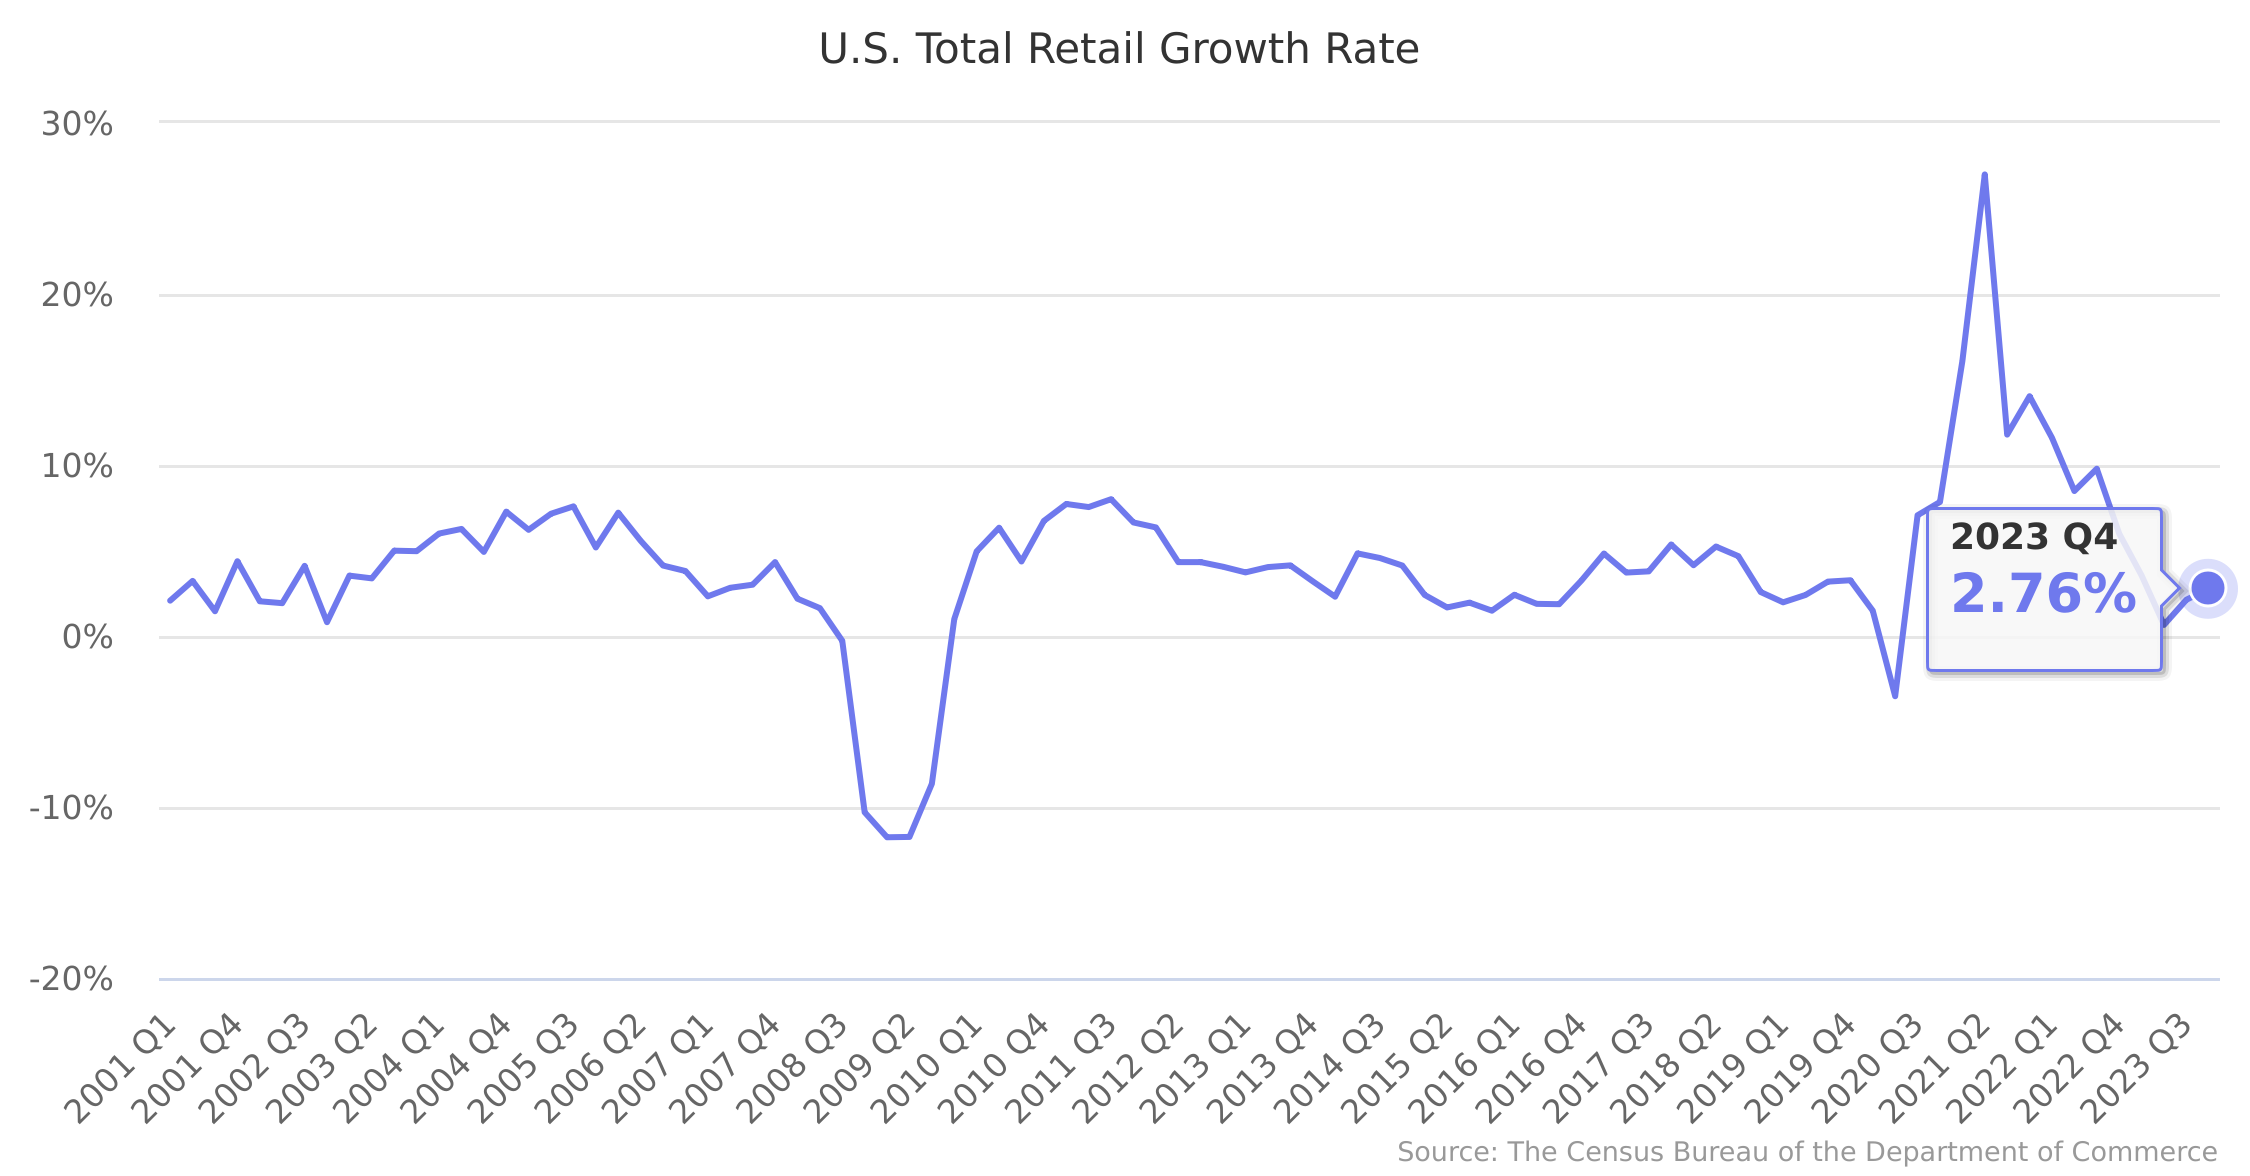 U.S. Total Retail Growth Rate